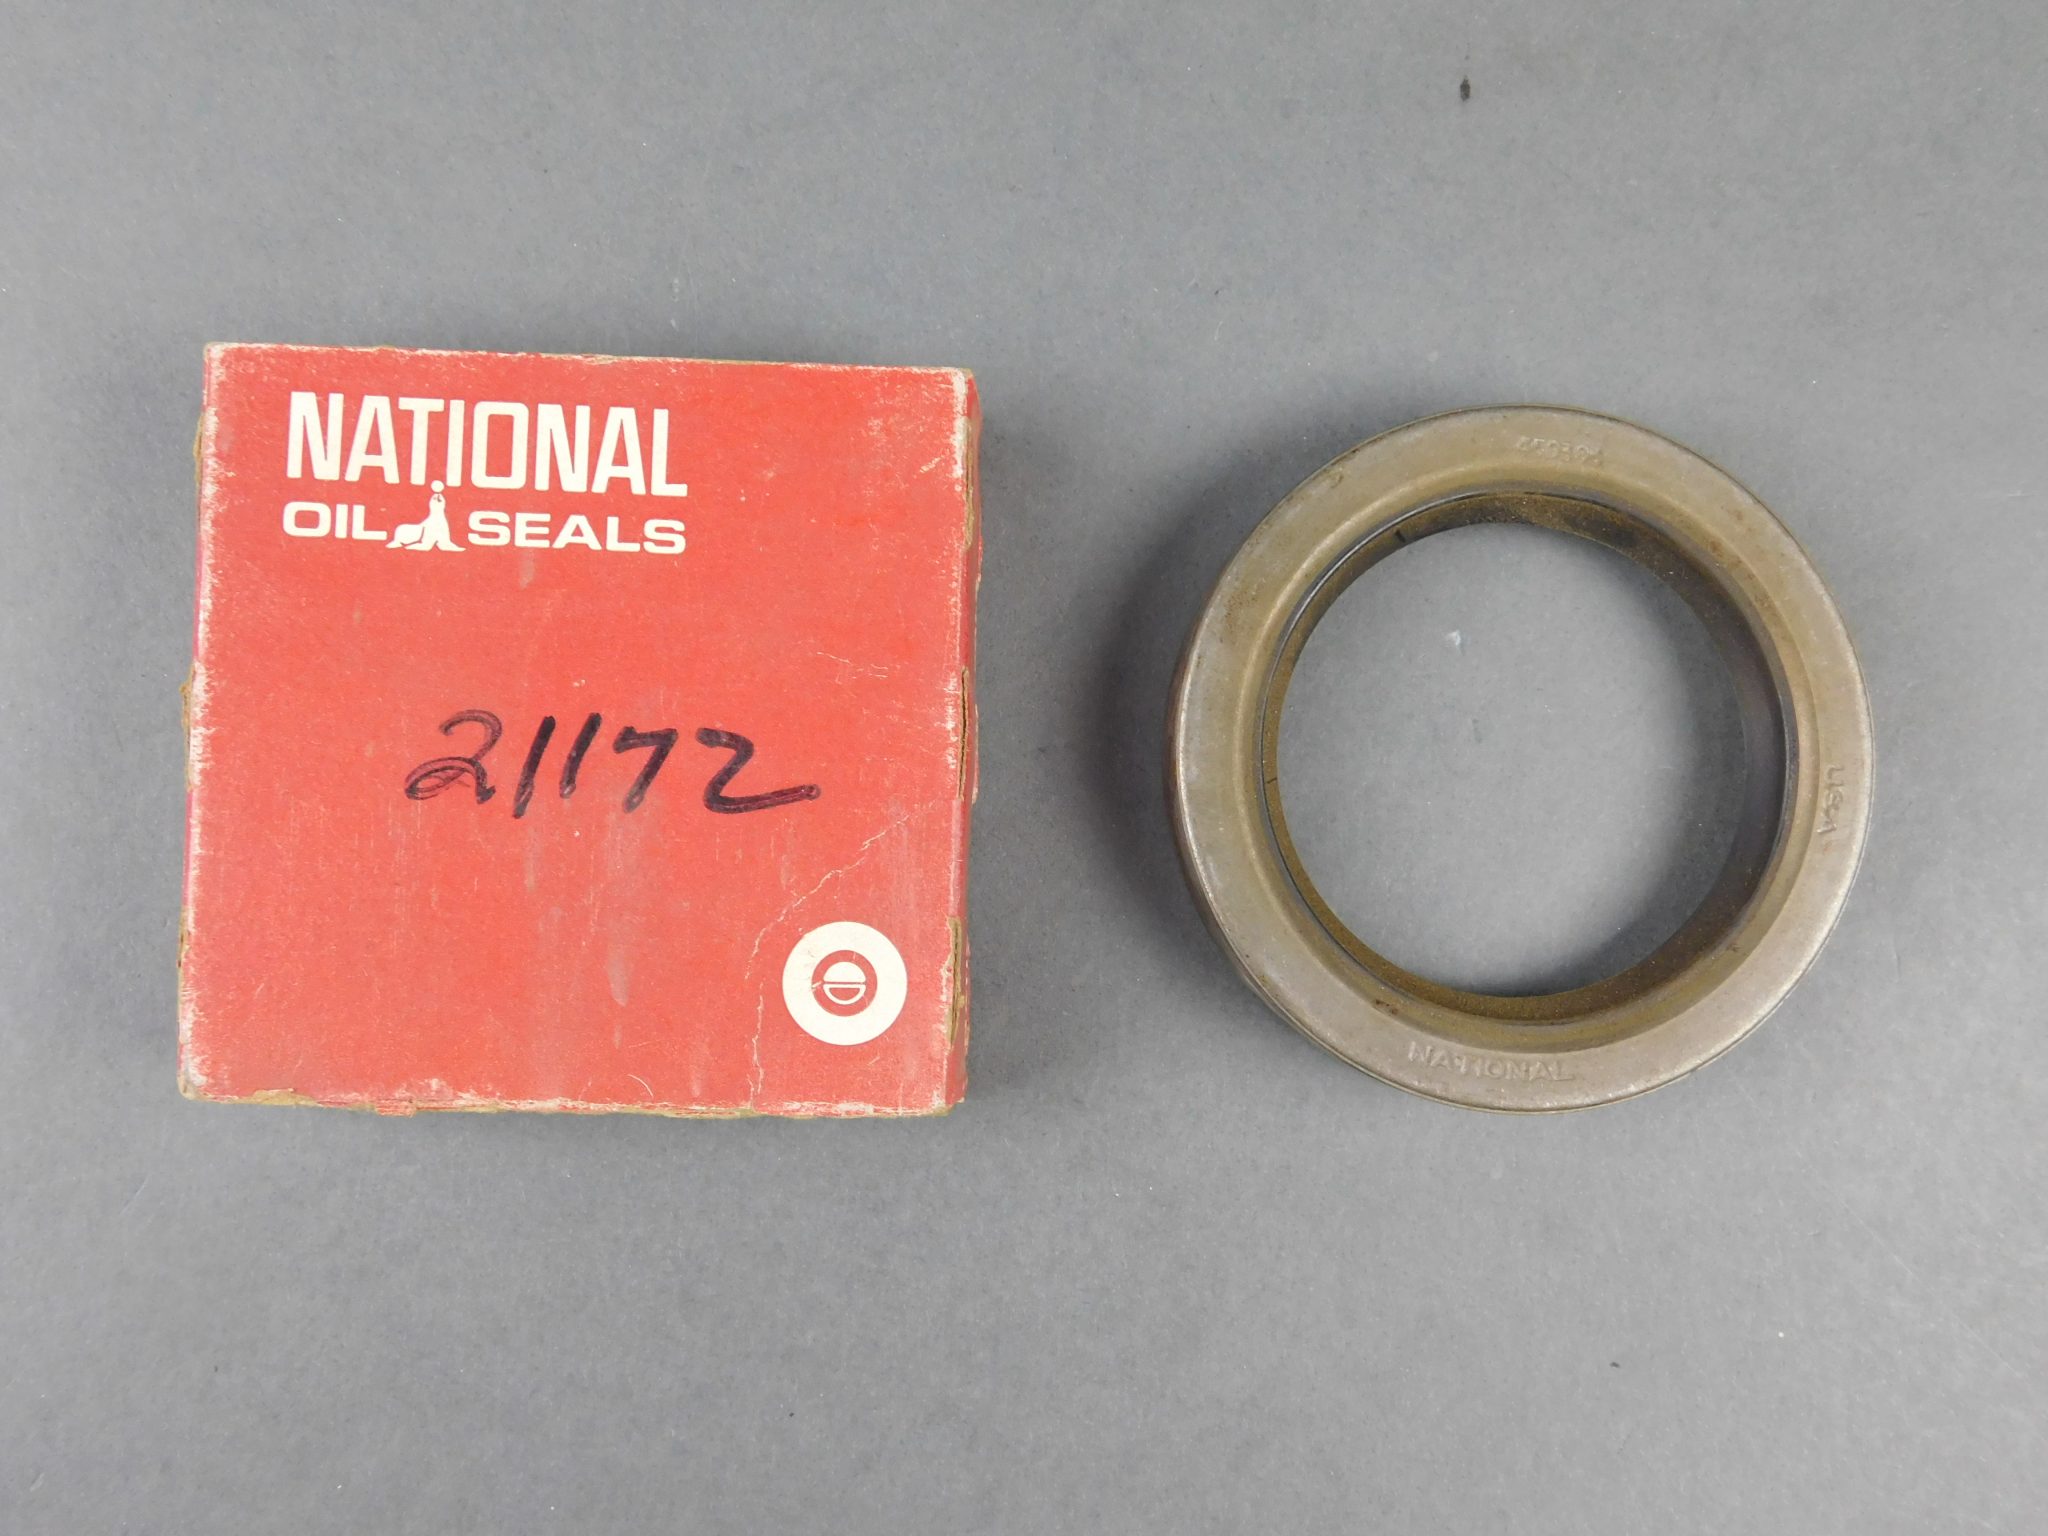 Federal Mogul National Oil Seals Wheel Seal Rear National/Carquest 710166 New 